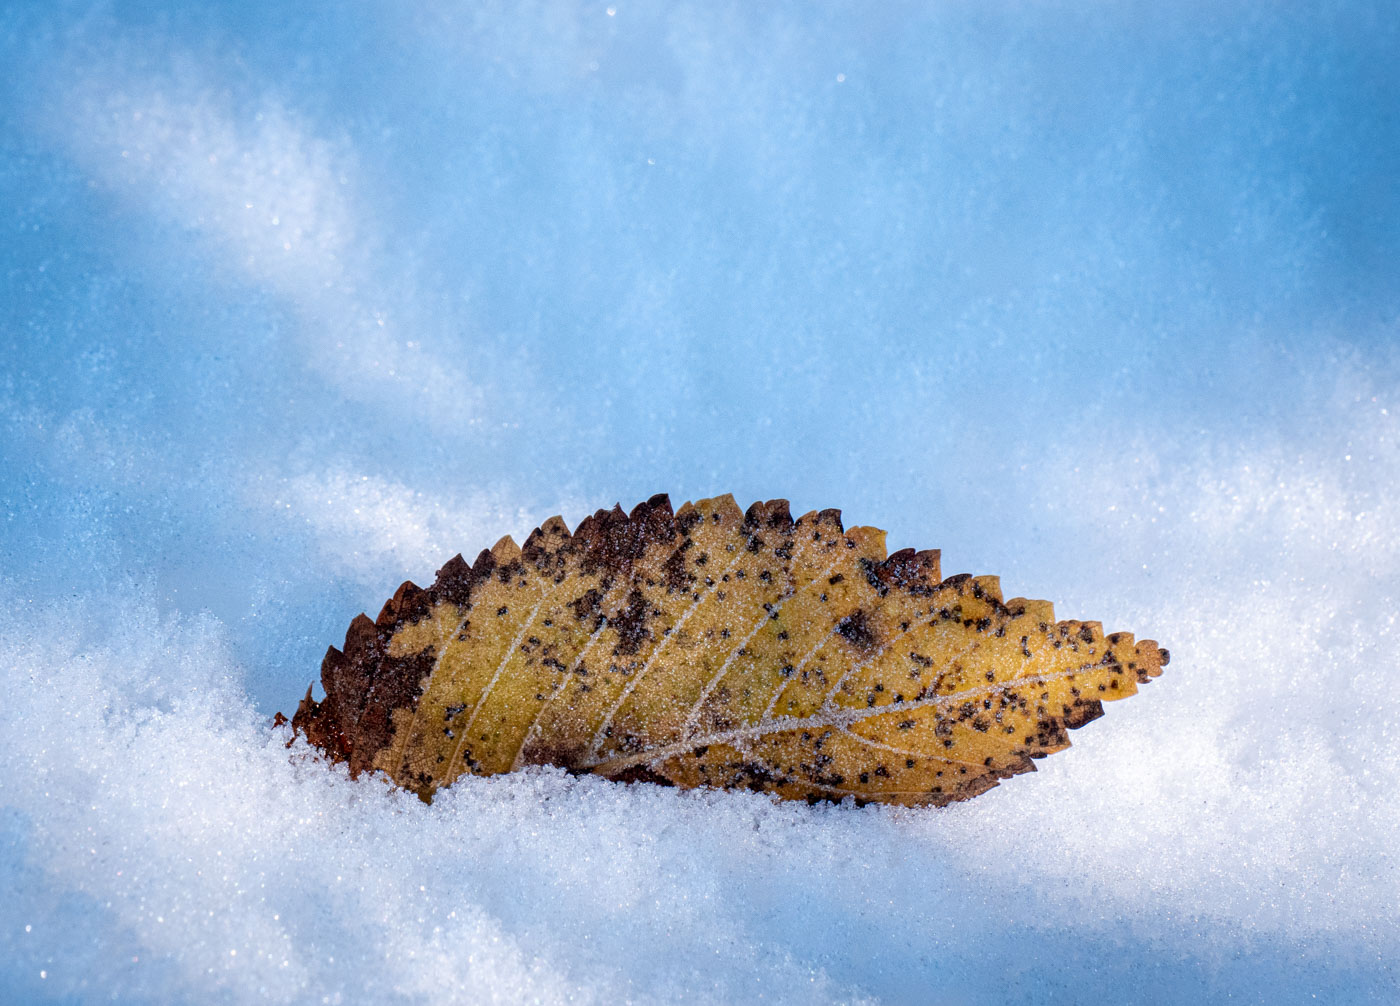 Leaf with icy texture.